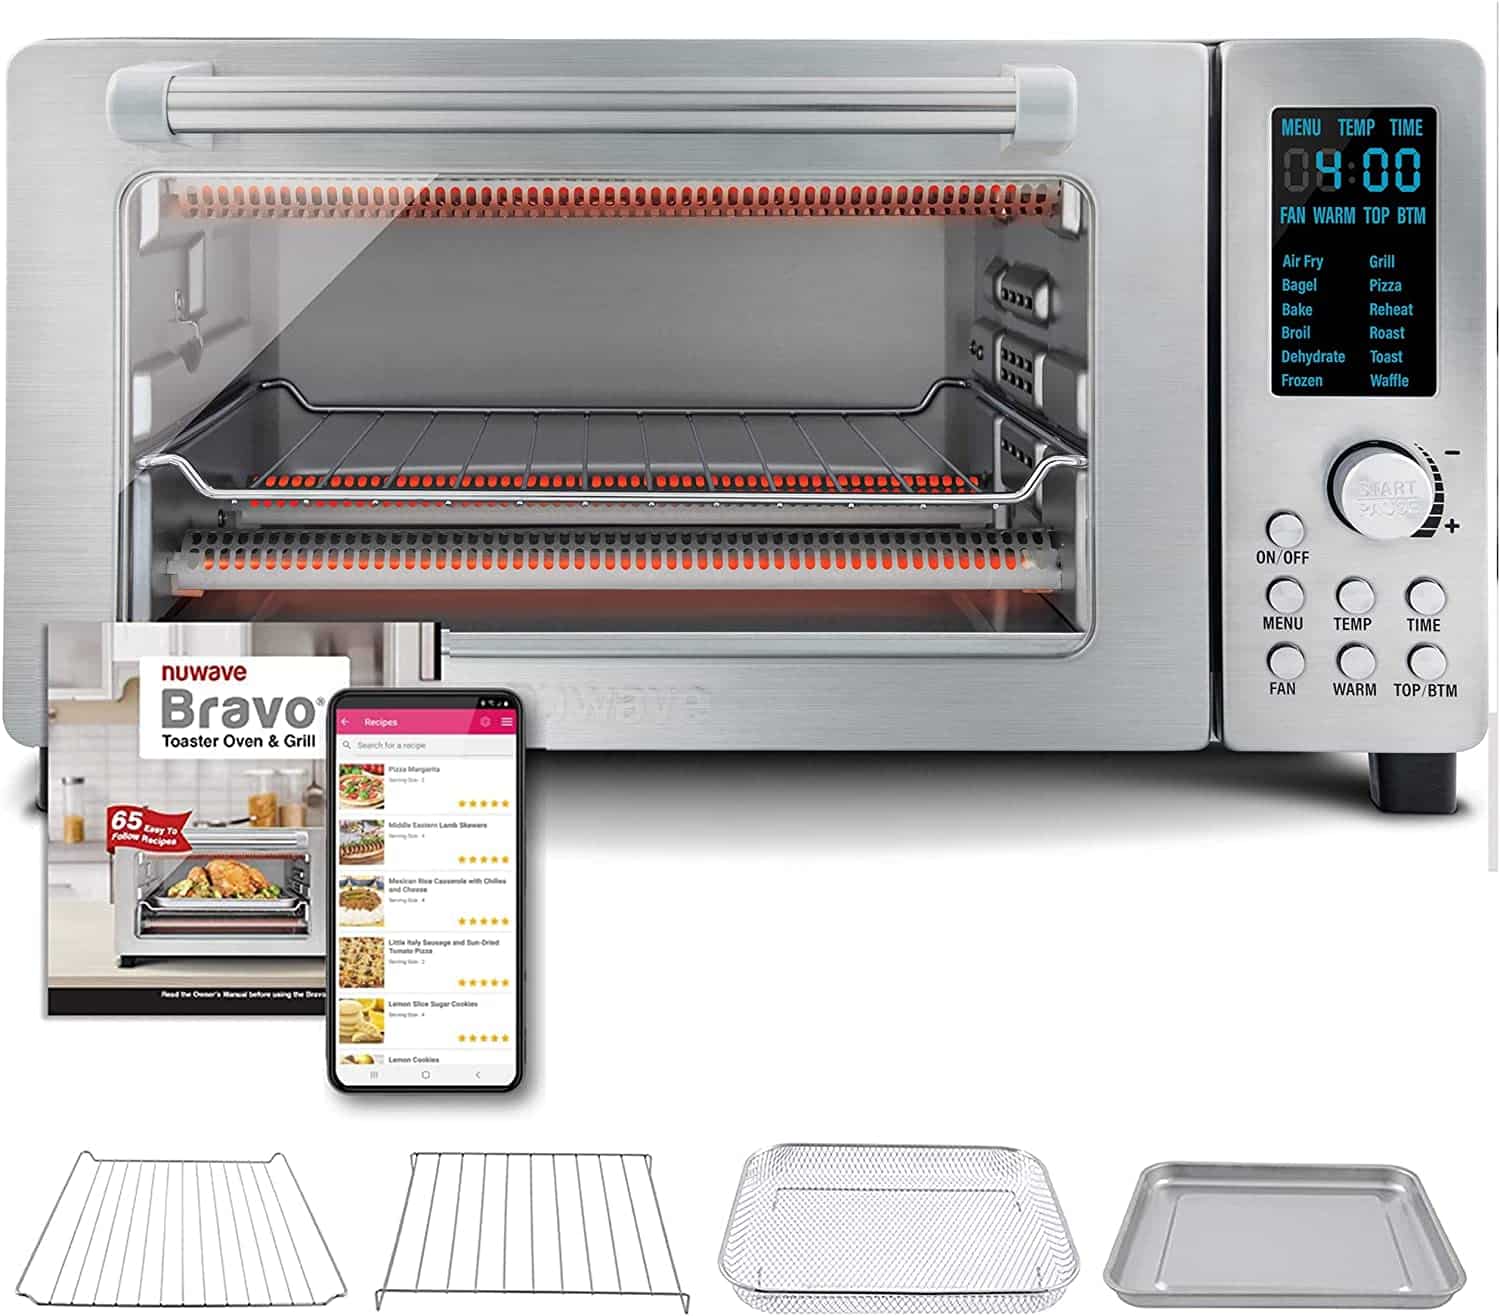 Can A Toaster Oven Replace A Microwave?